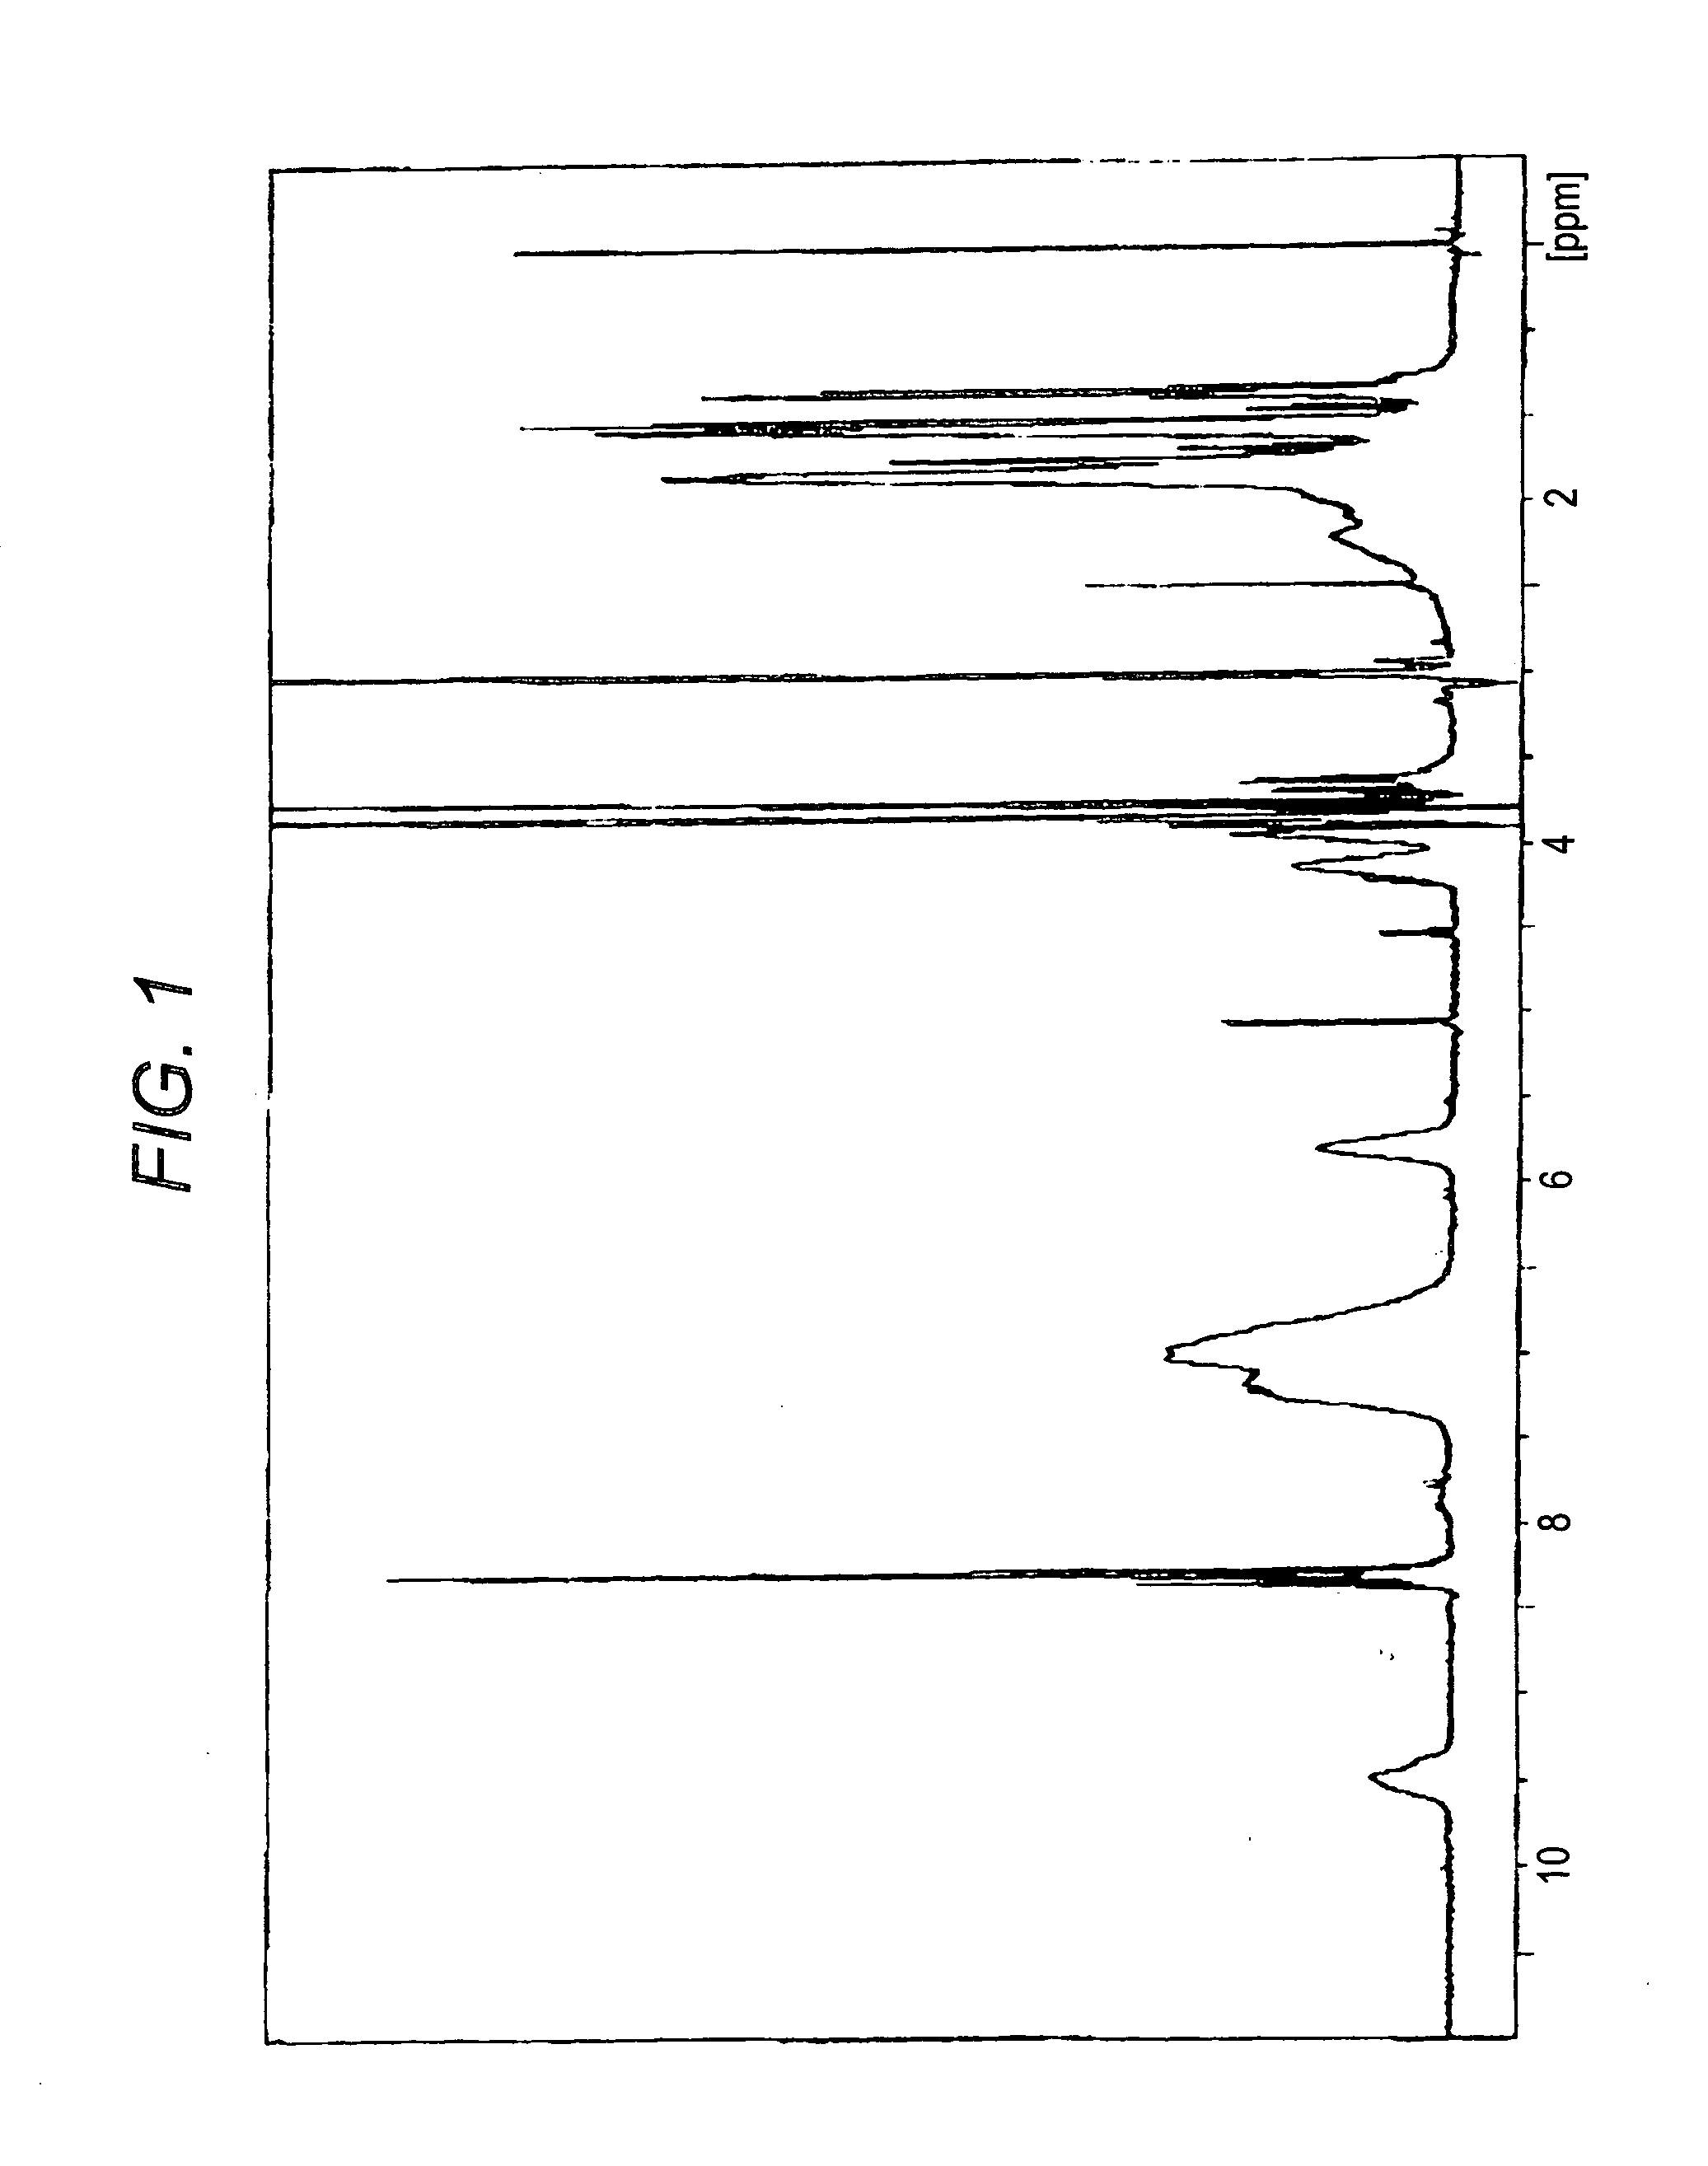 Photosensitive composition, pattern-forming method using the composition, and resin used in the composition